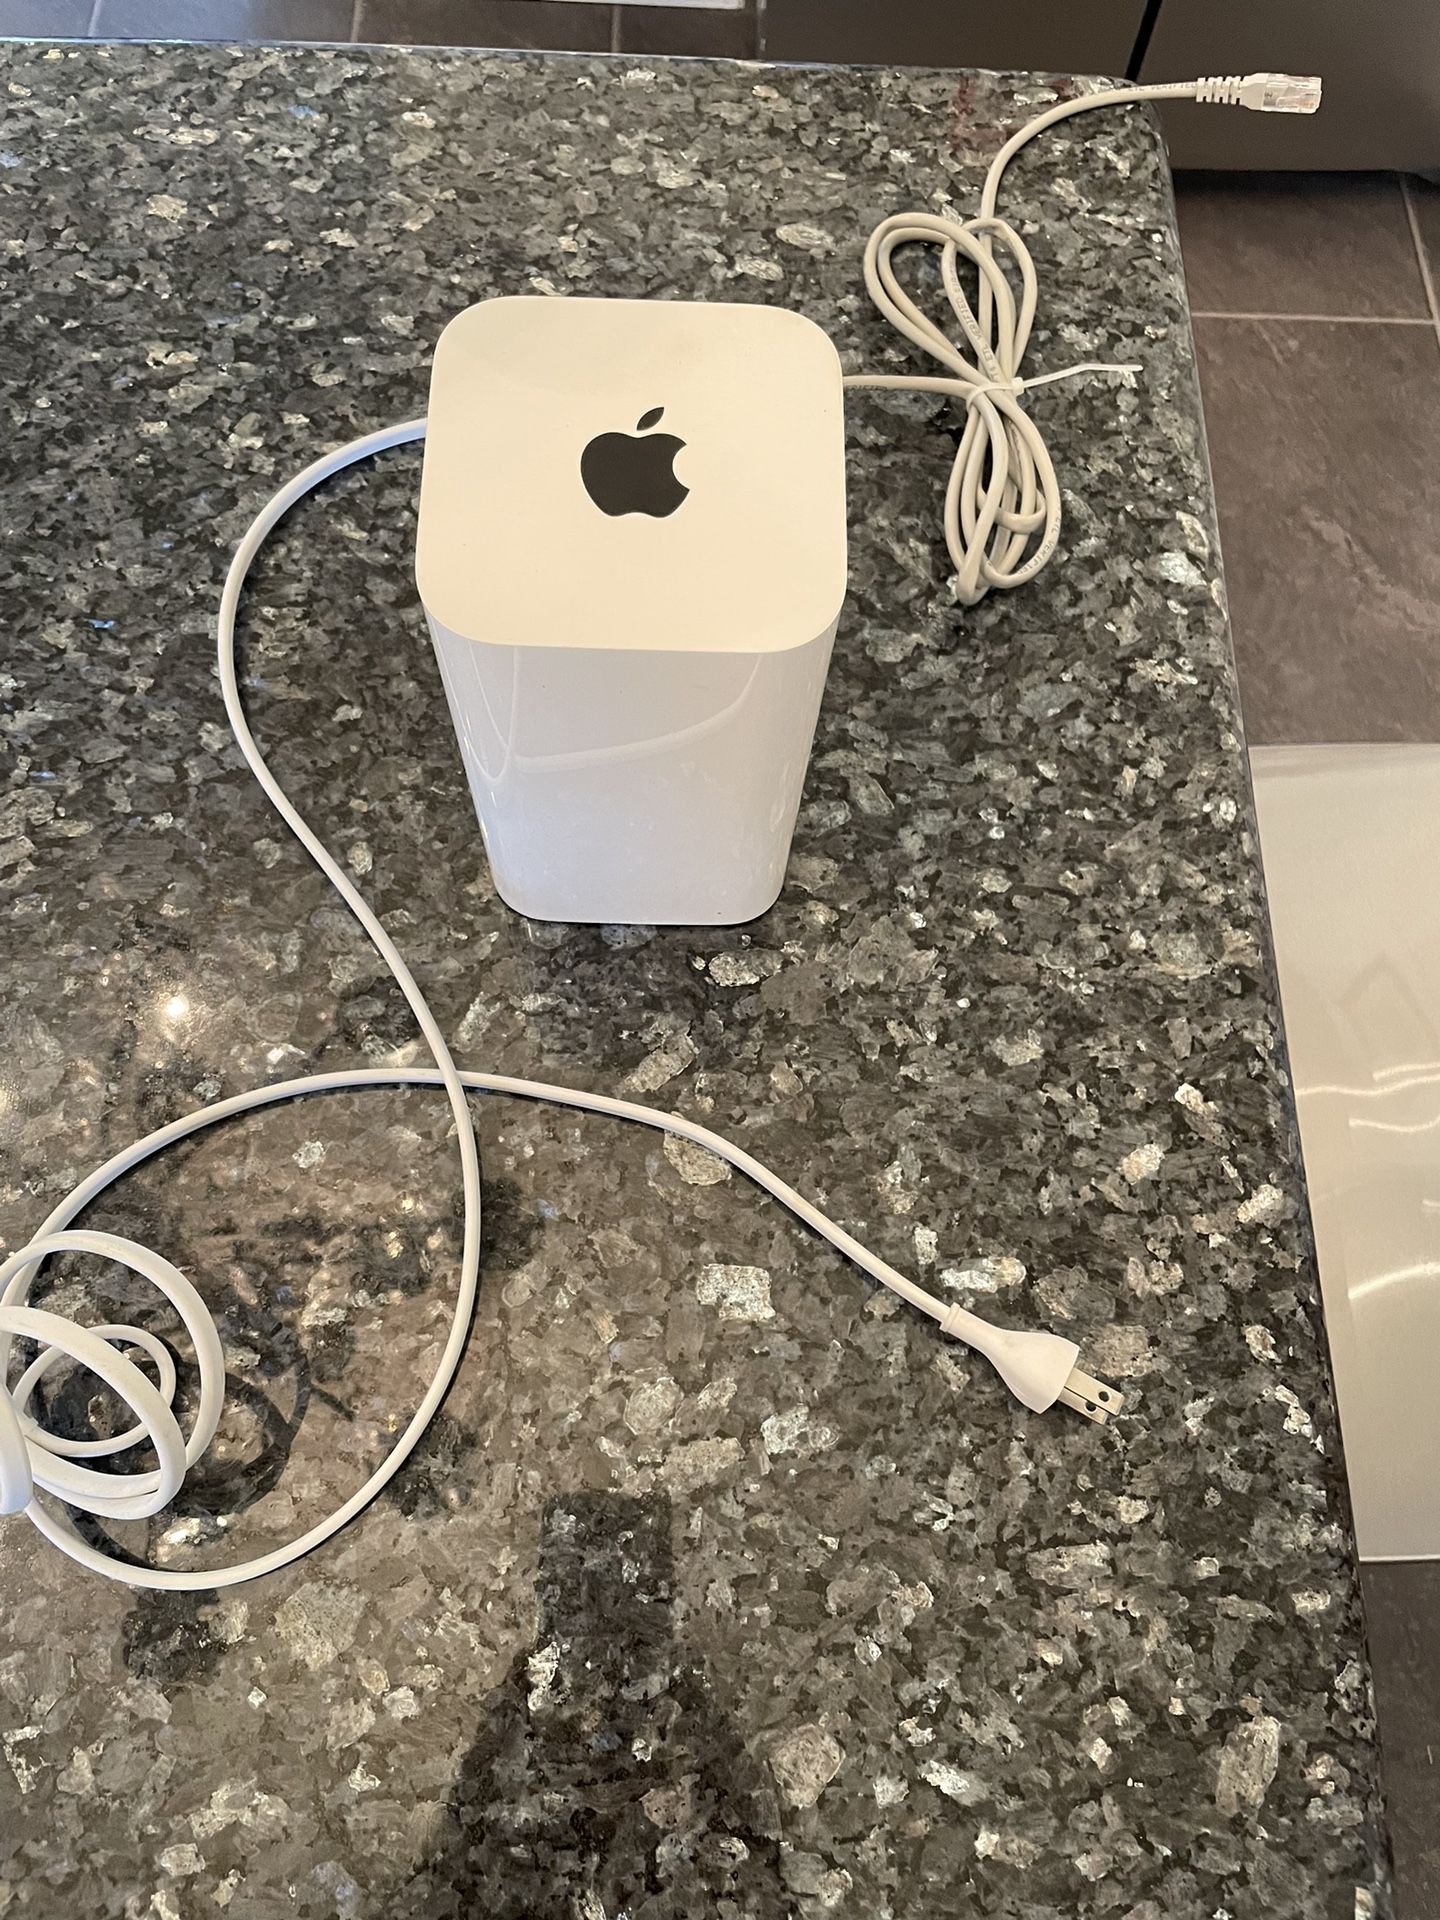 Apple Airport Extreme Base Station wireless router 